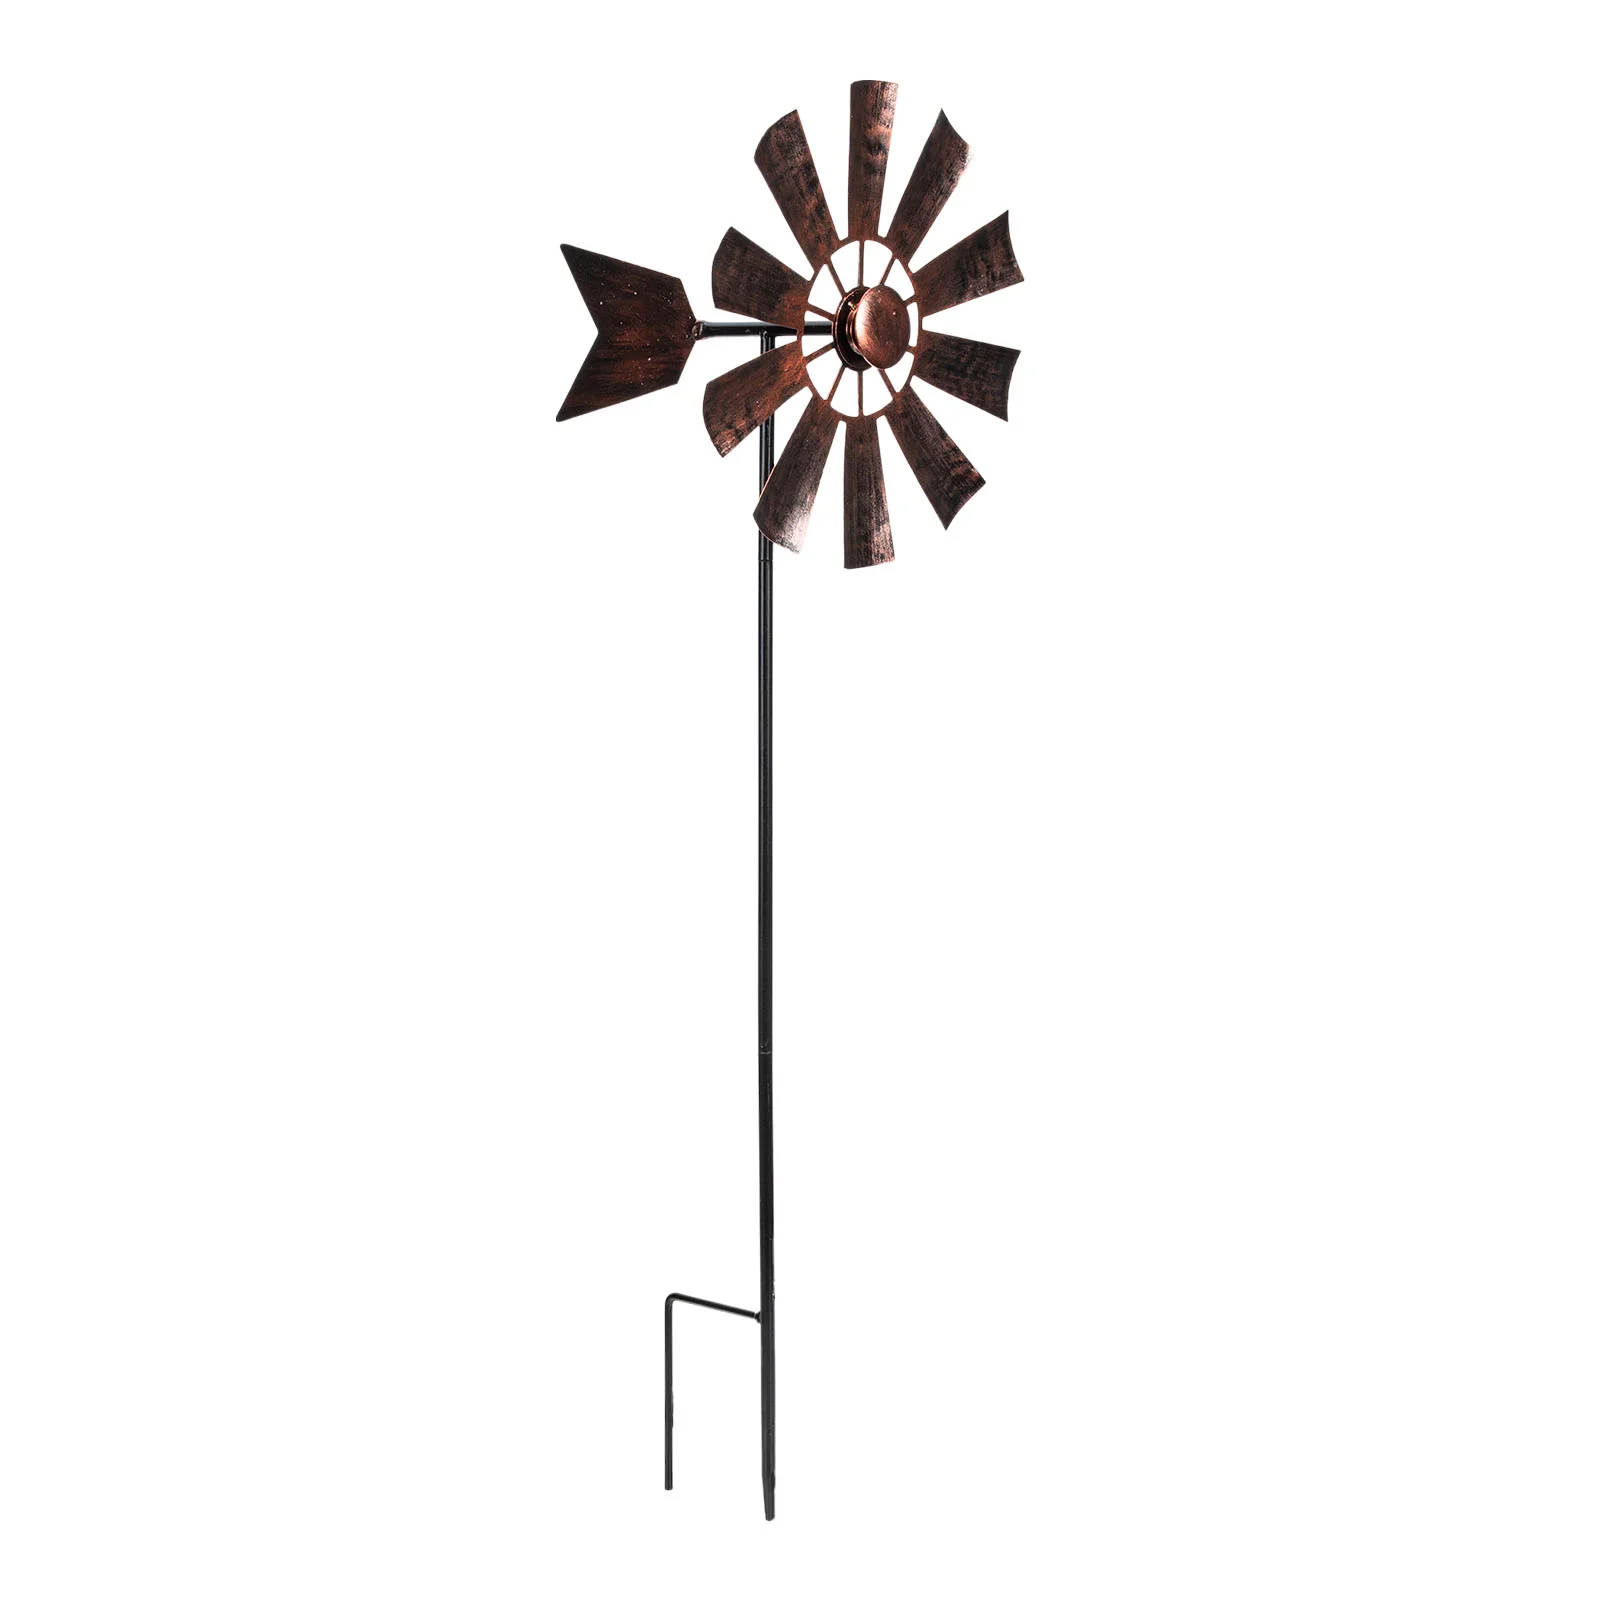 

Lawn Ornaments Garden Decor Pinwheel Botanical Patio Wind Spinners Metal Outdoor Windmills Stake Wrought Iron